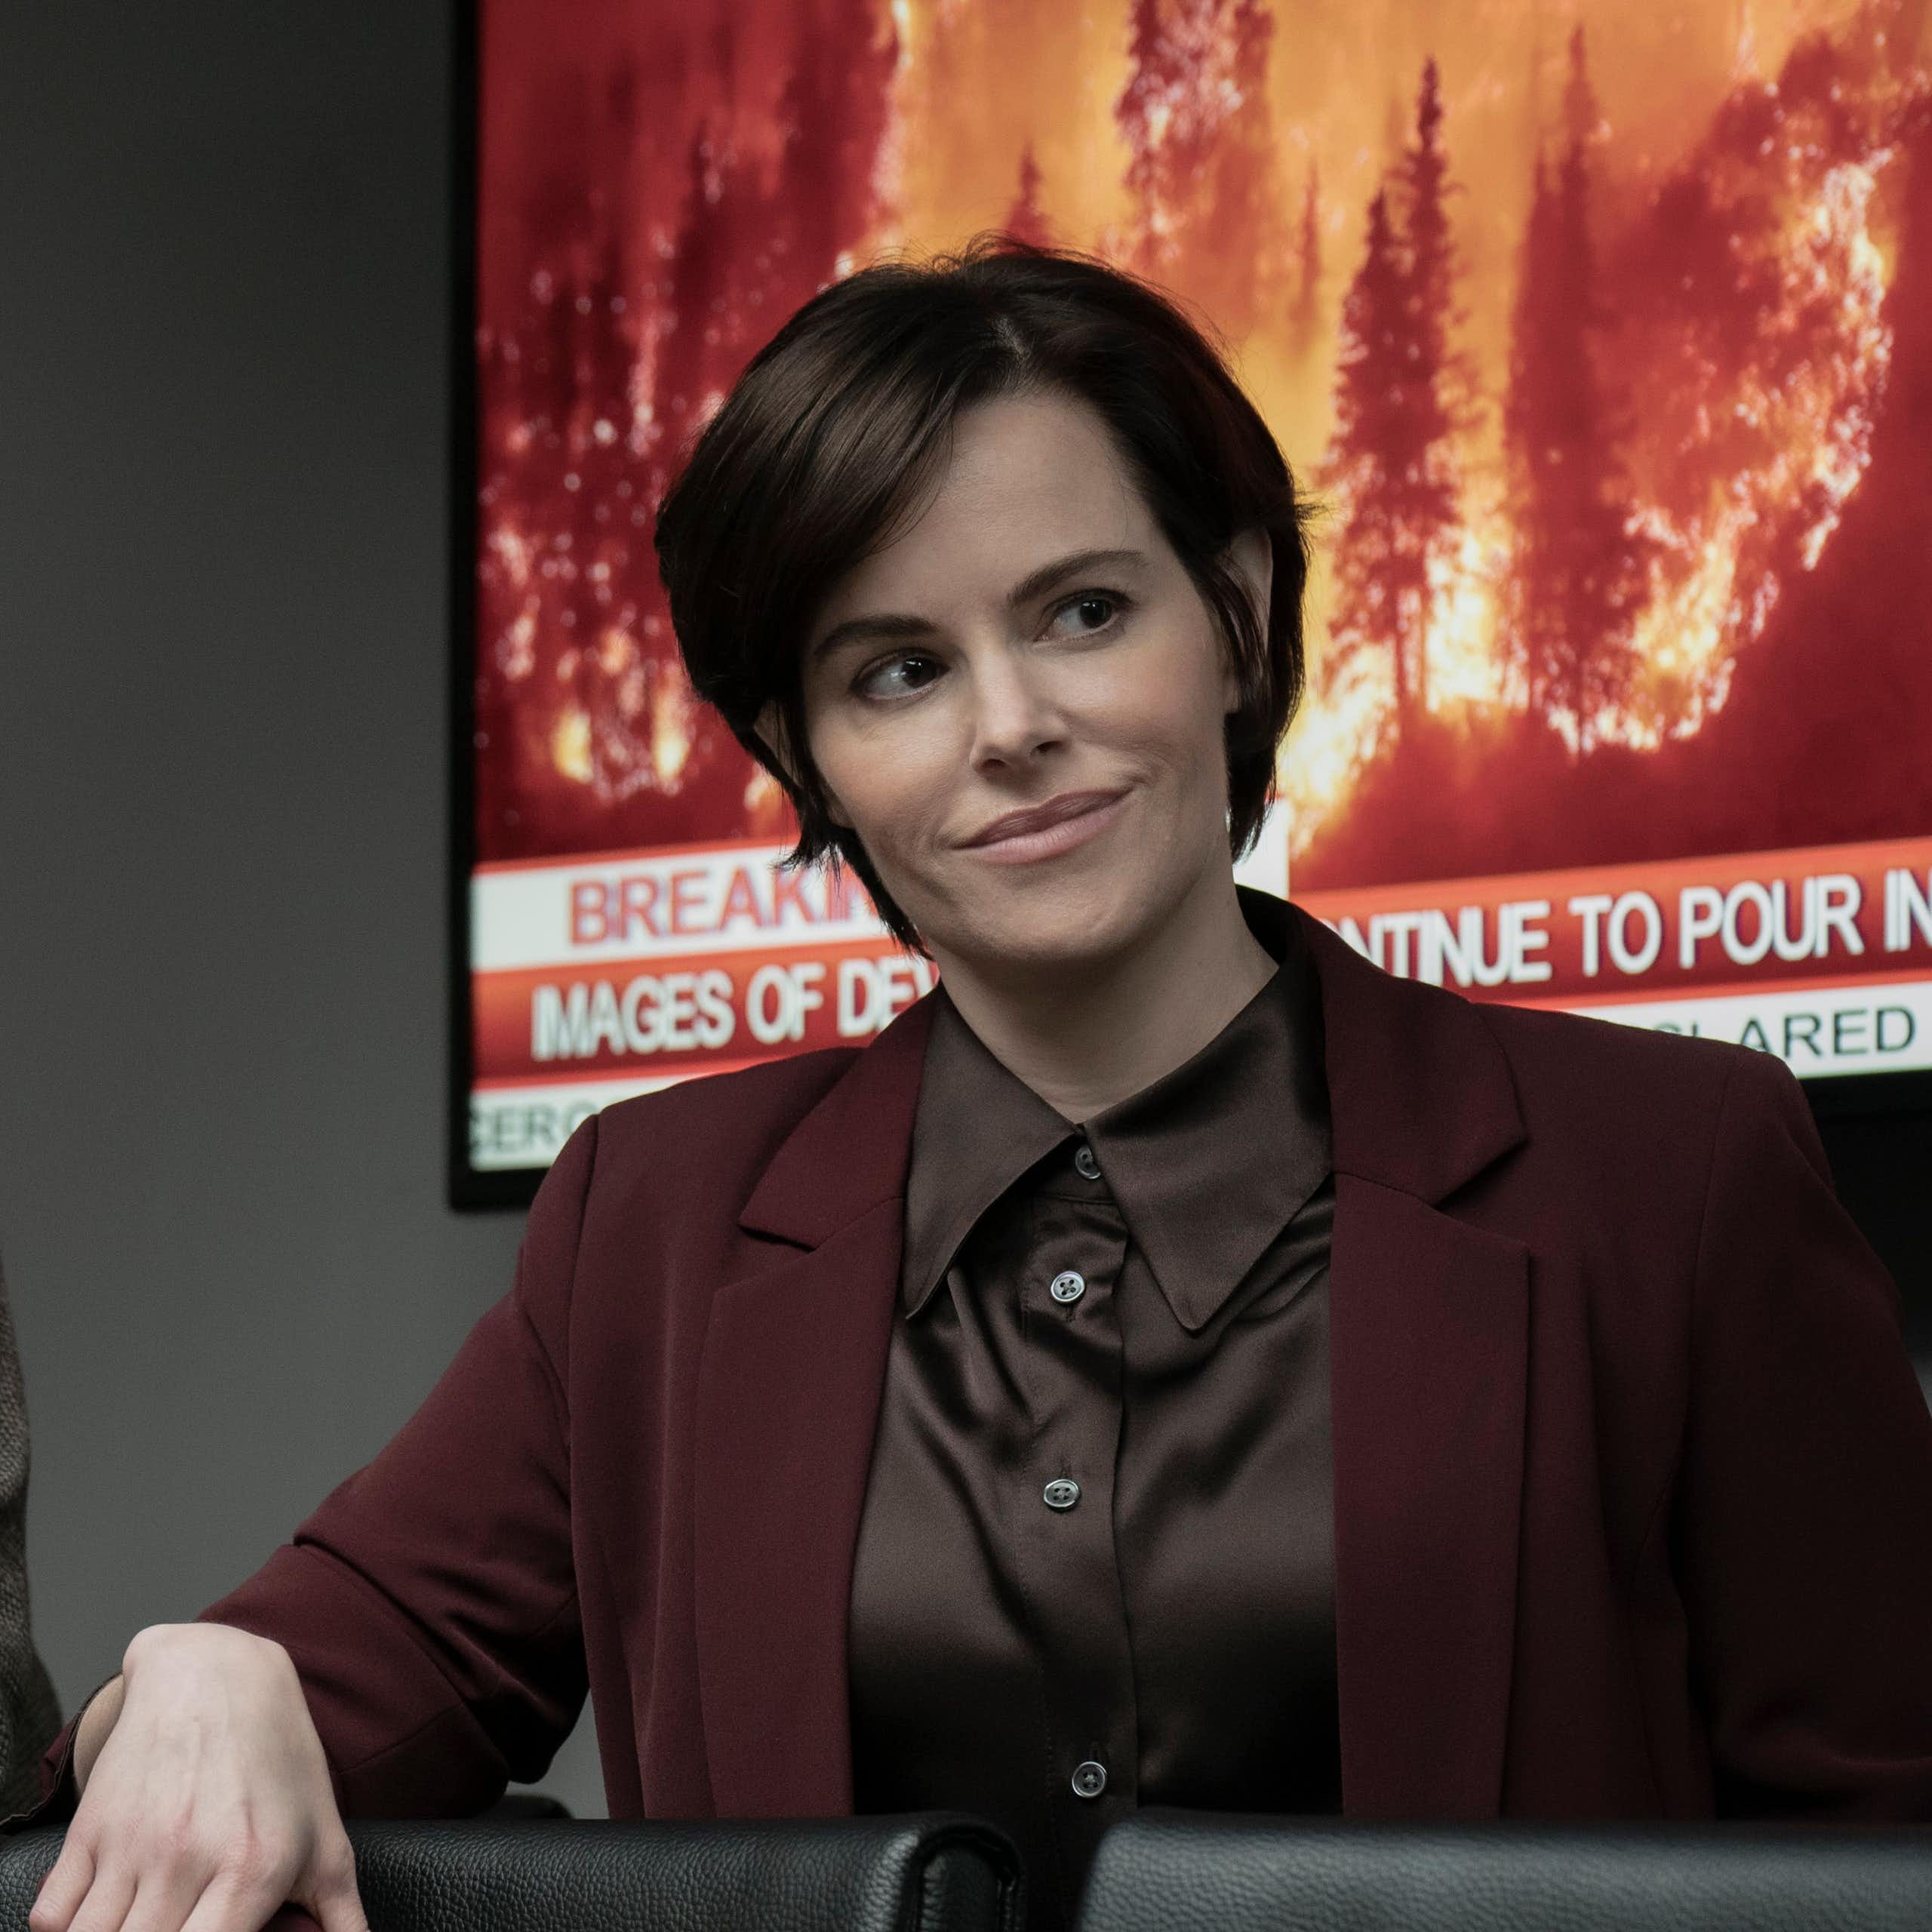 A man and woman in suit jackets with a television image of a forest fire behind them.